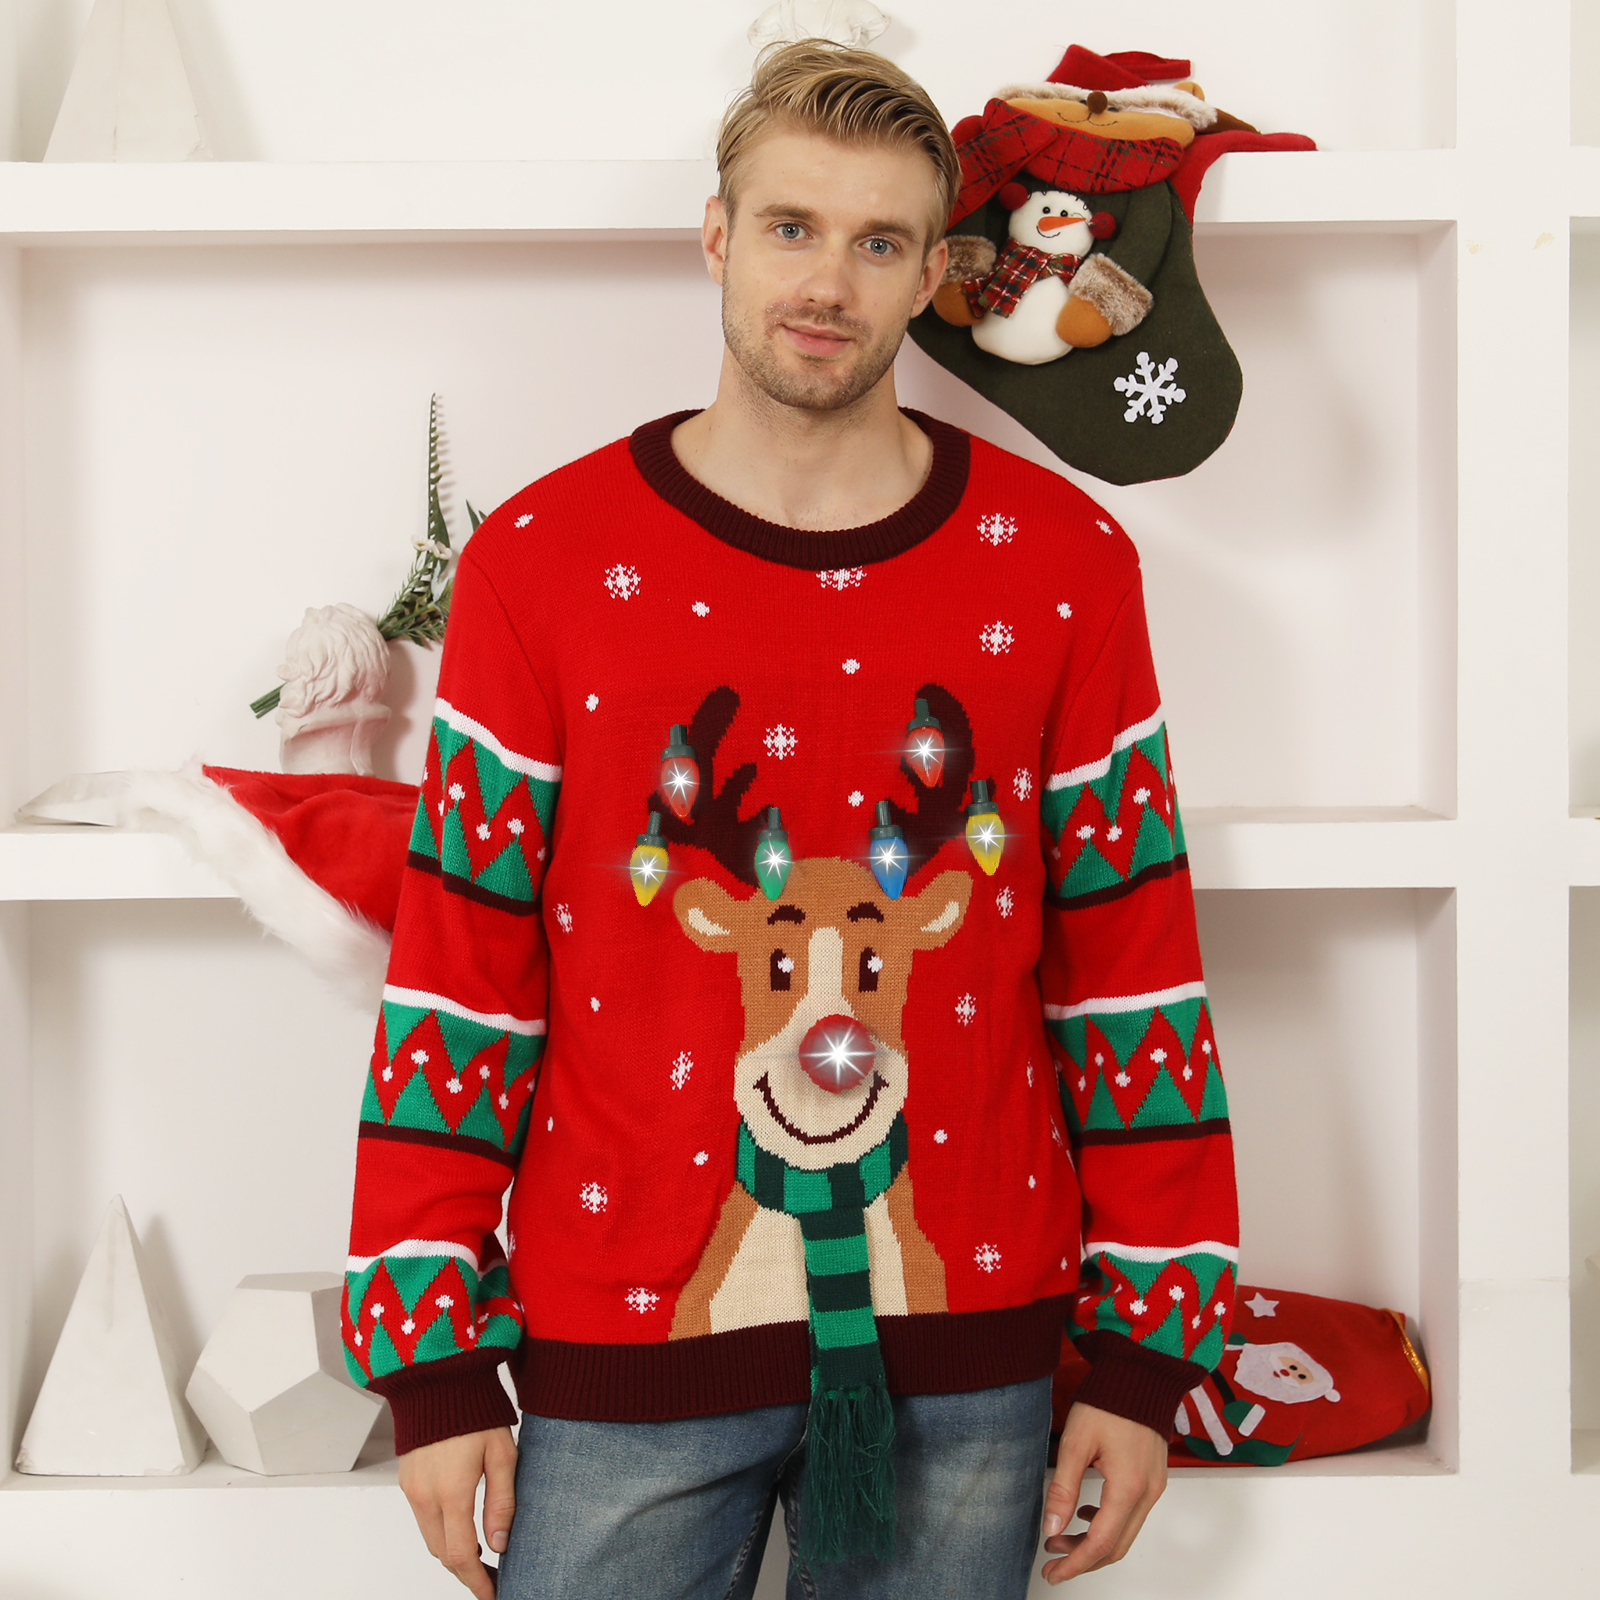 Ugly Christmas Sweater for Women Men,Light up Christmas Sweater,Funny Unisex Reindeer Xmas Ugly Sweaters for Couples - image 2 of 6